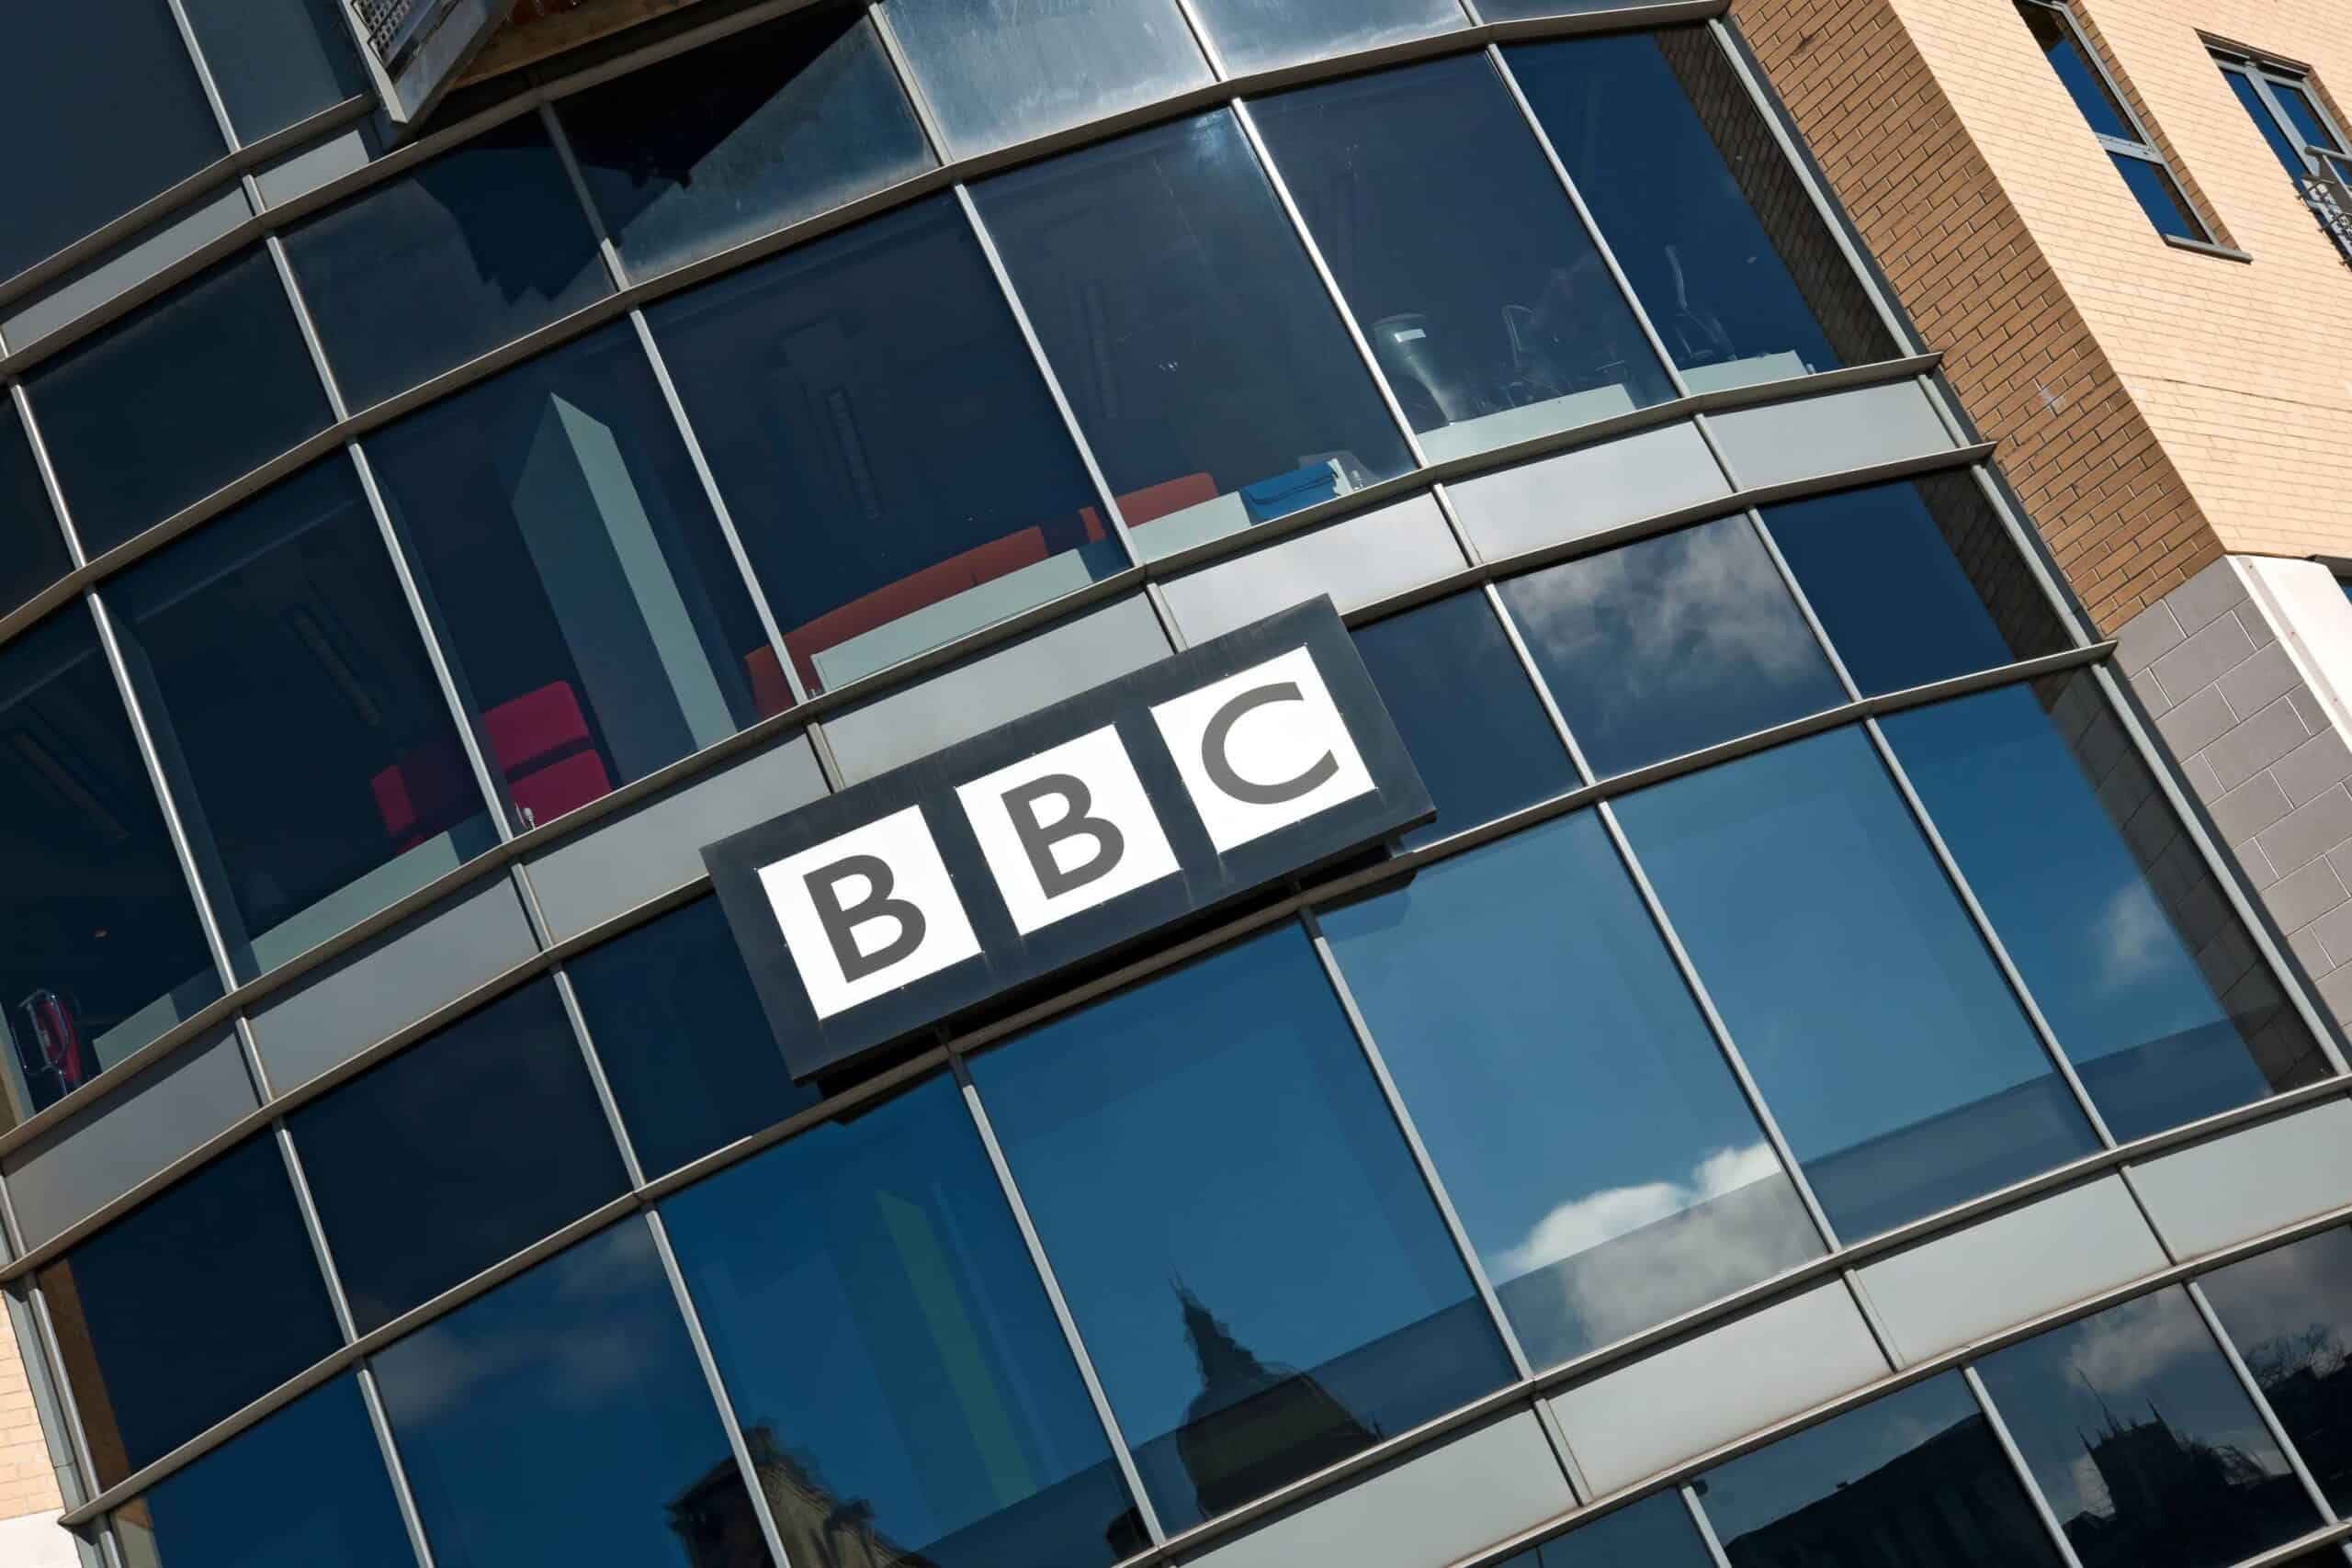 Pressure mounts on BBC as it deals with presenter explicit photo claims